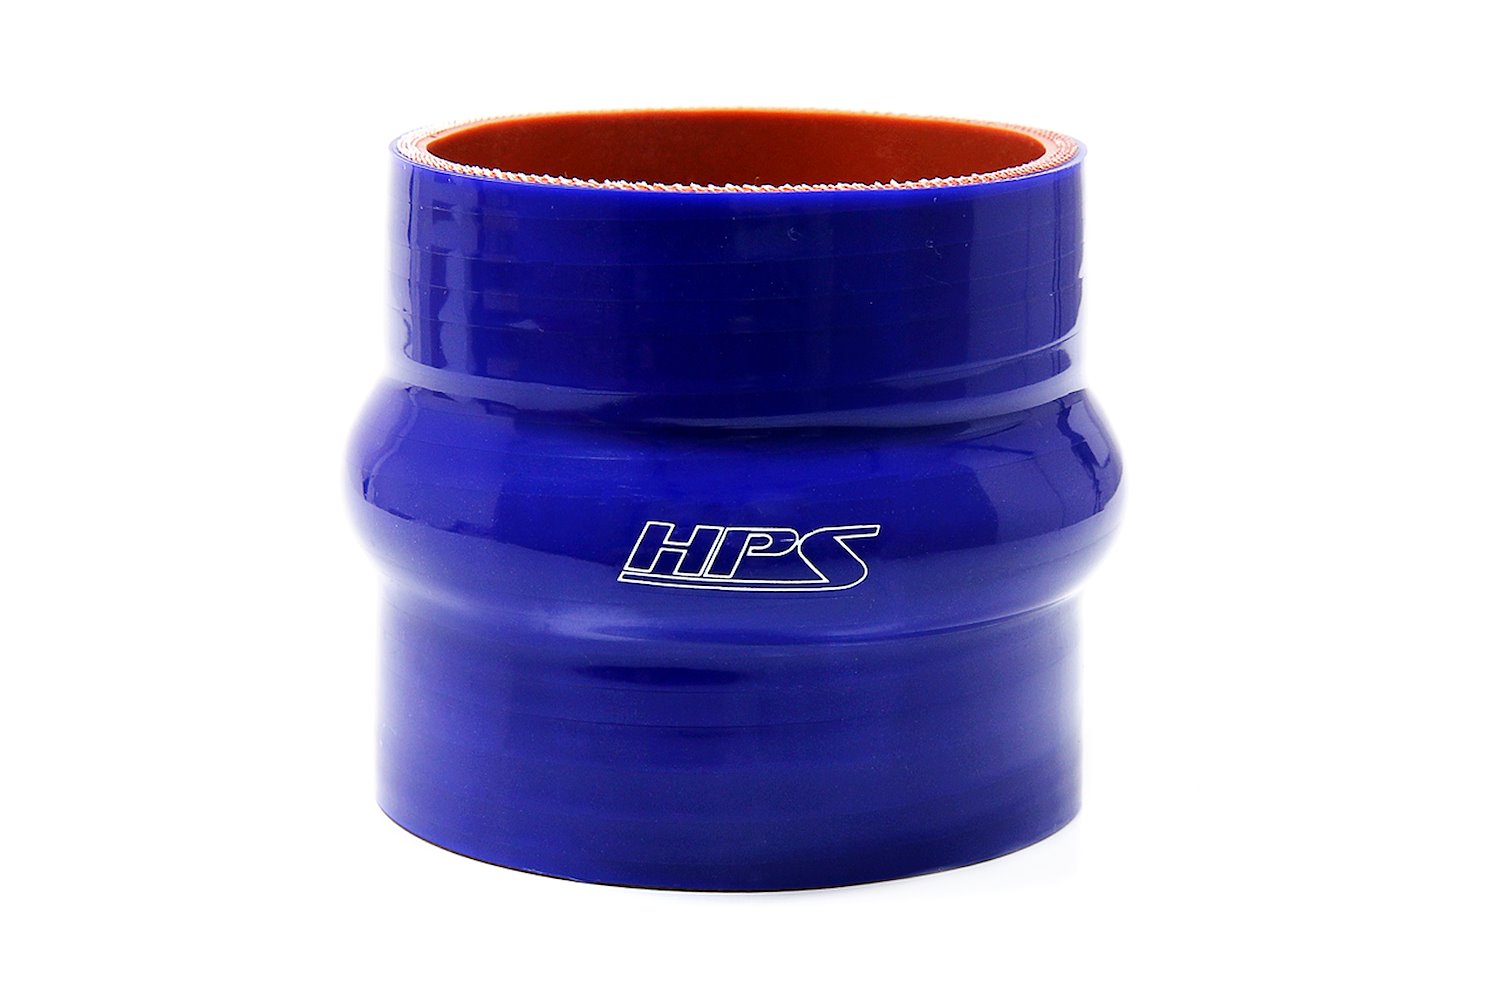 HTSHC-125-BLUE Silicone Hump Coupler Hose, High-Temp 4-Ply Reinforced, 1-1/4 in. ID, 3 in. Long, Blue